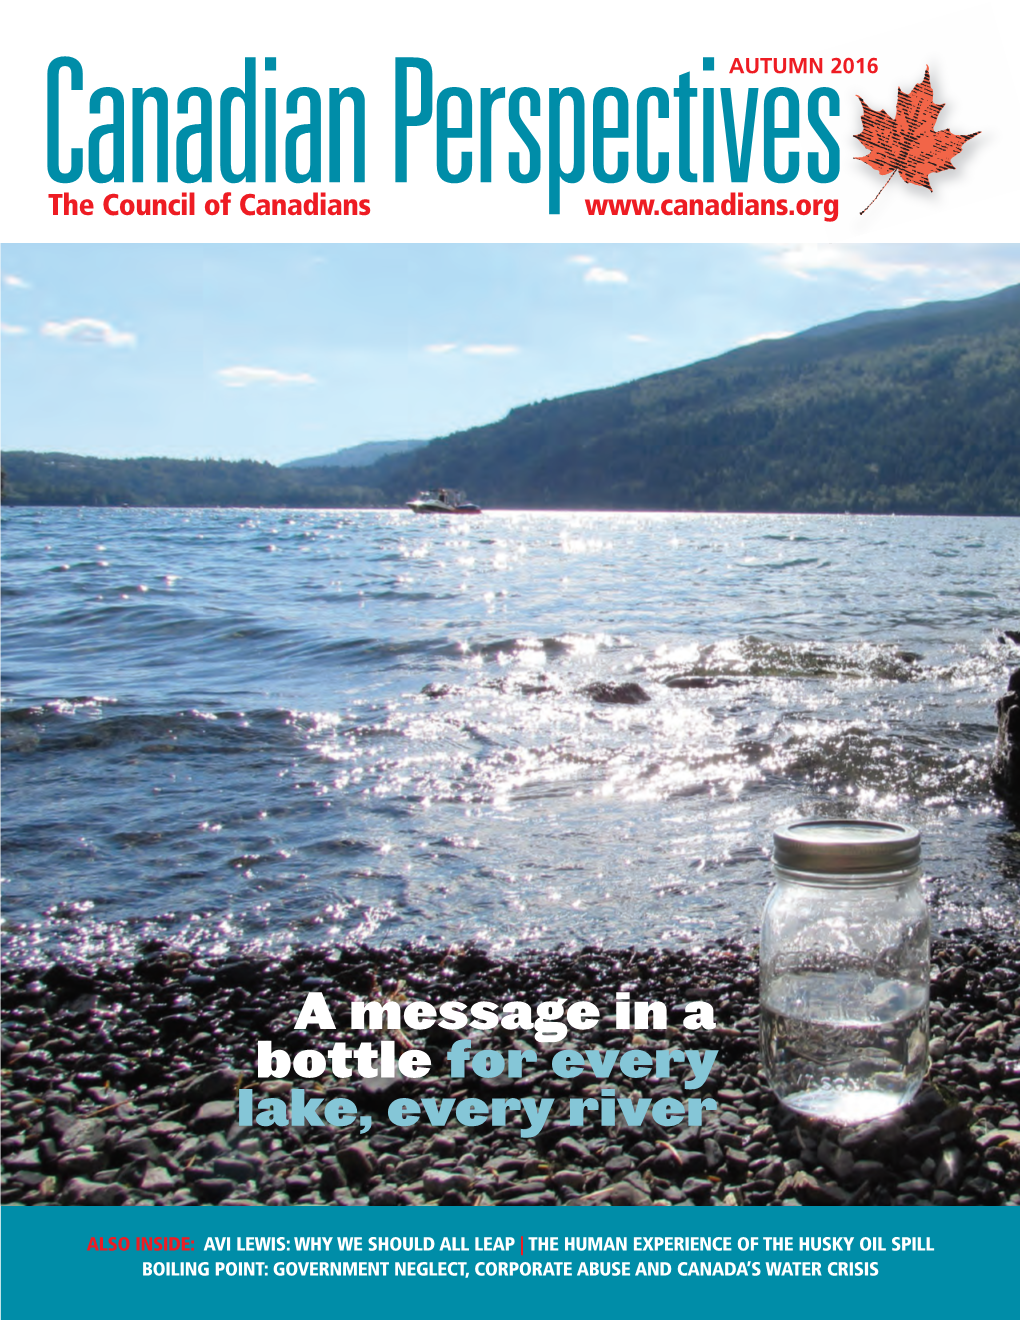 A Message in a Bottle for Every Lake, Every River, Canadian Perspectives, Autumn 2016